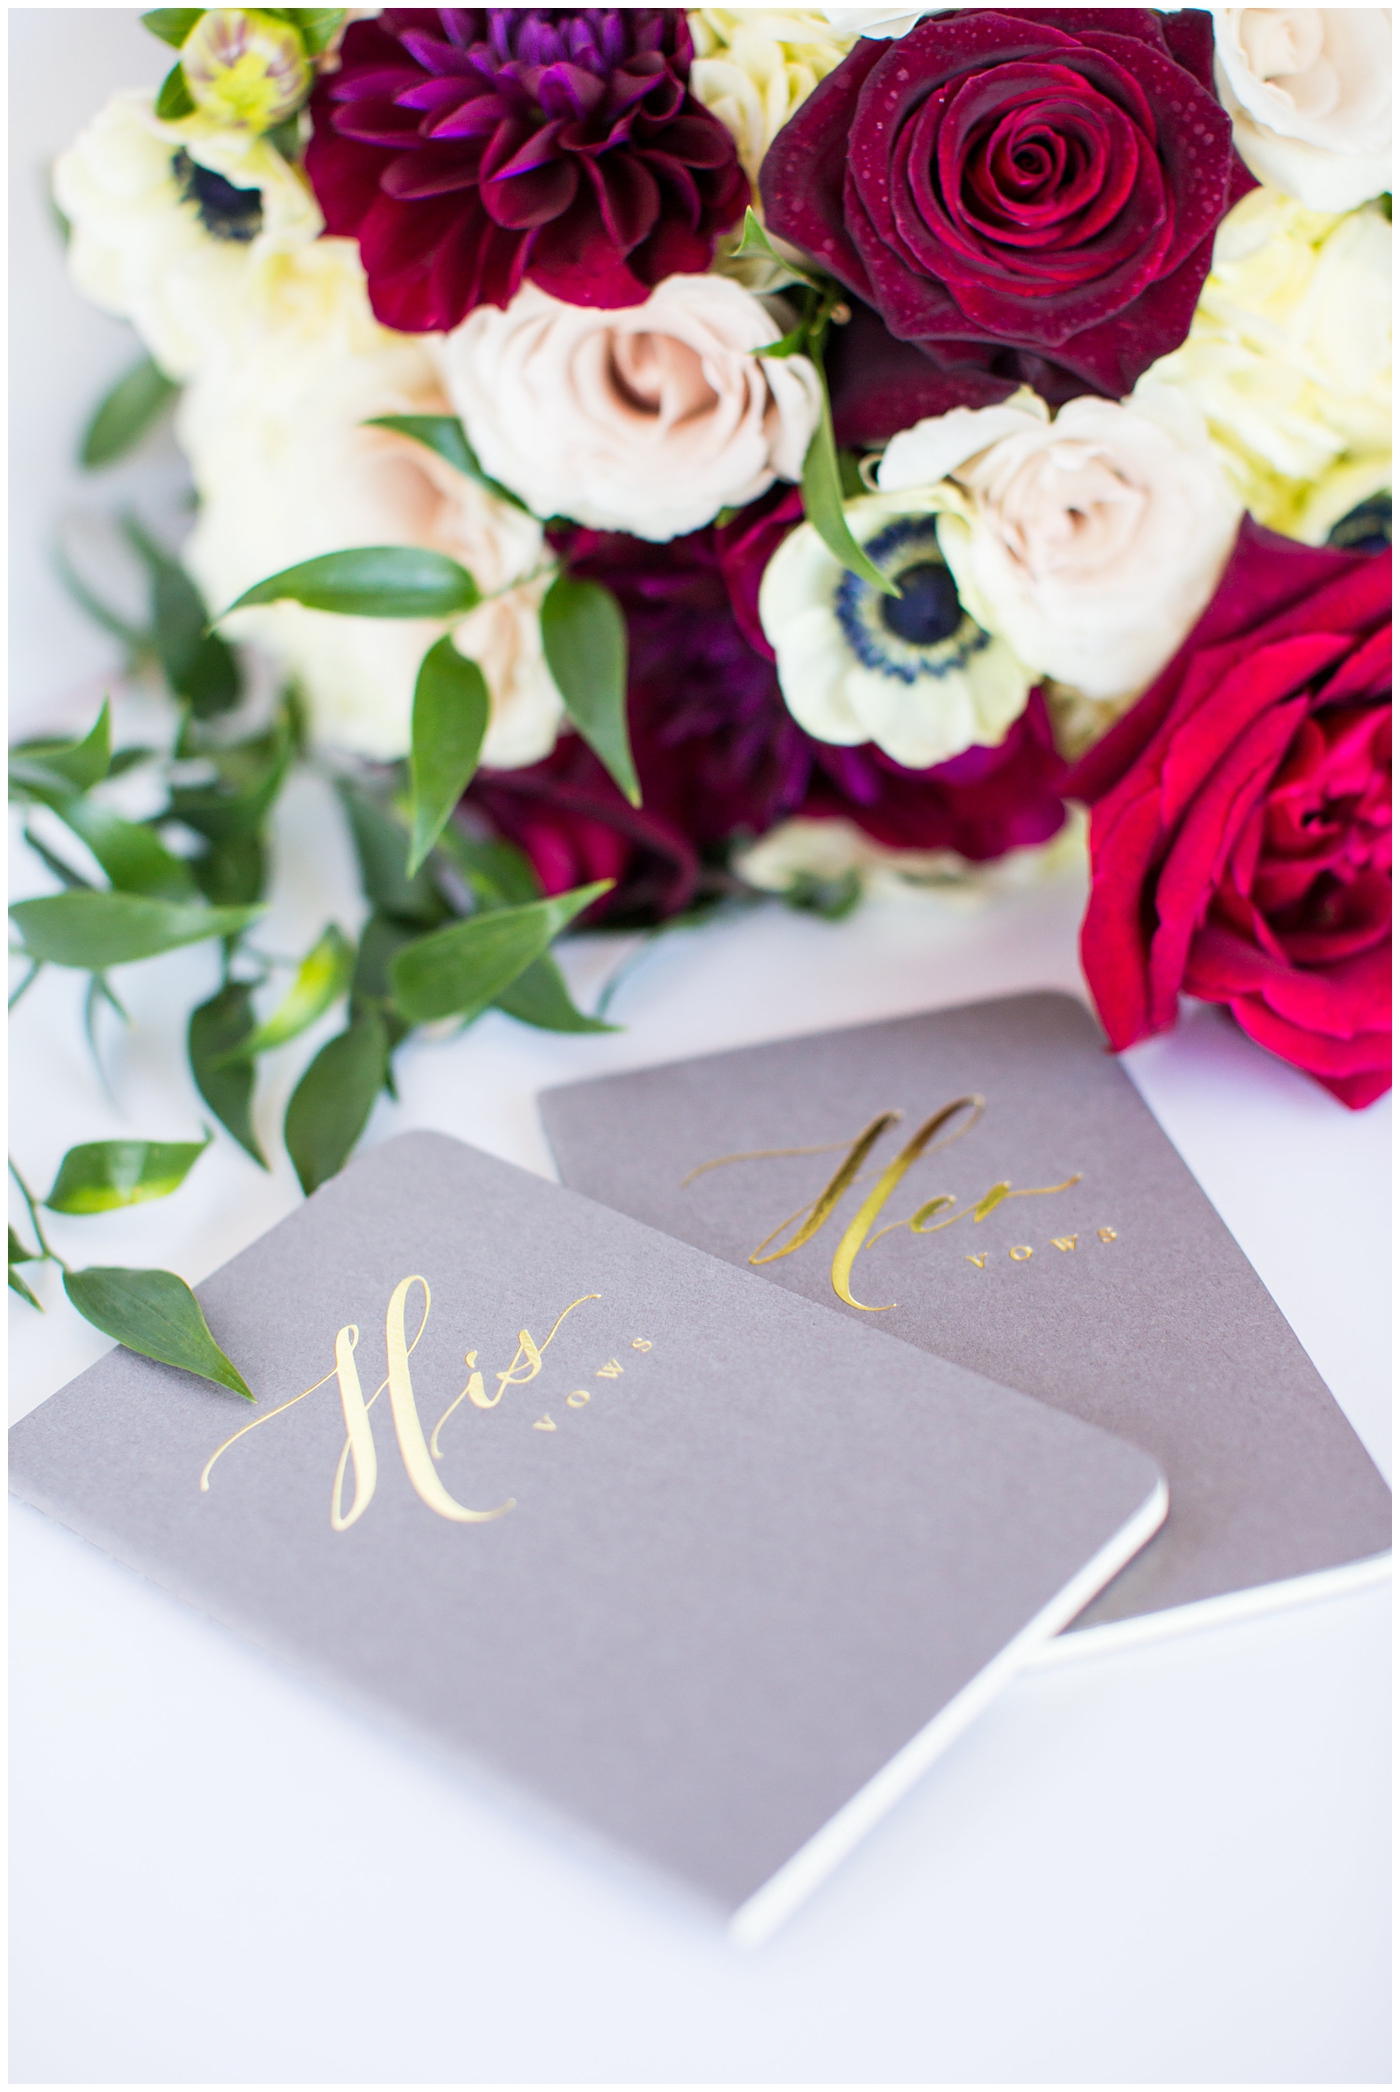 his and her gray booklets with gold lettering